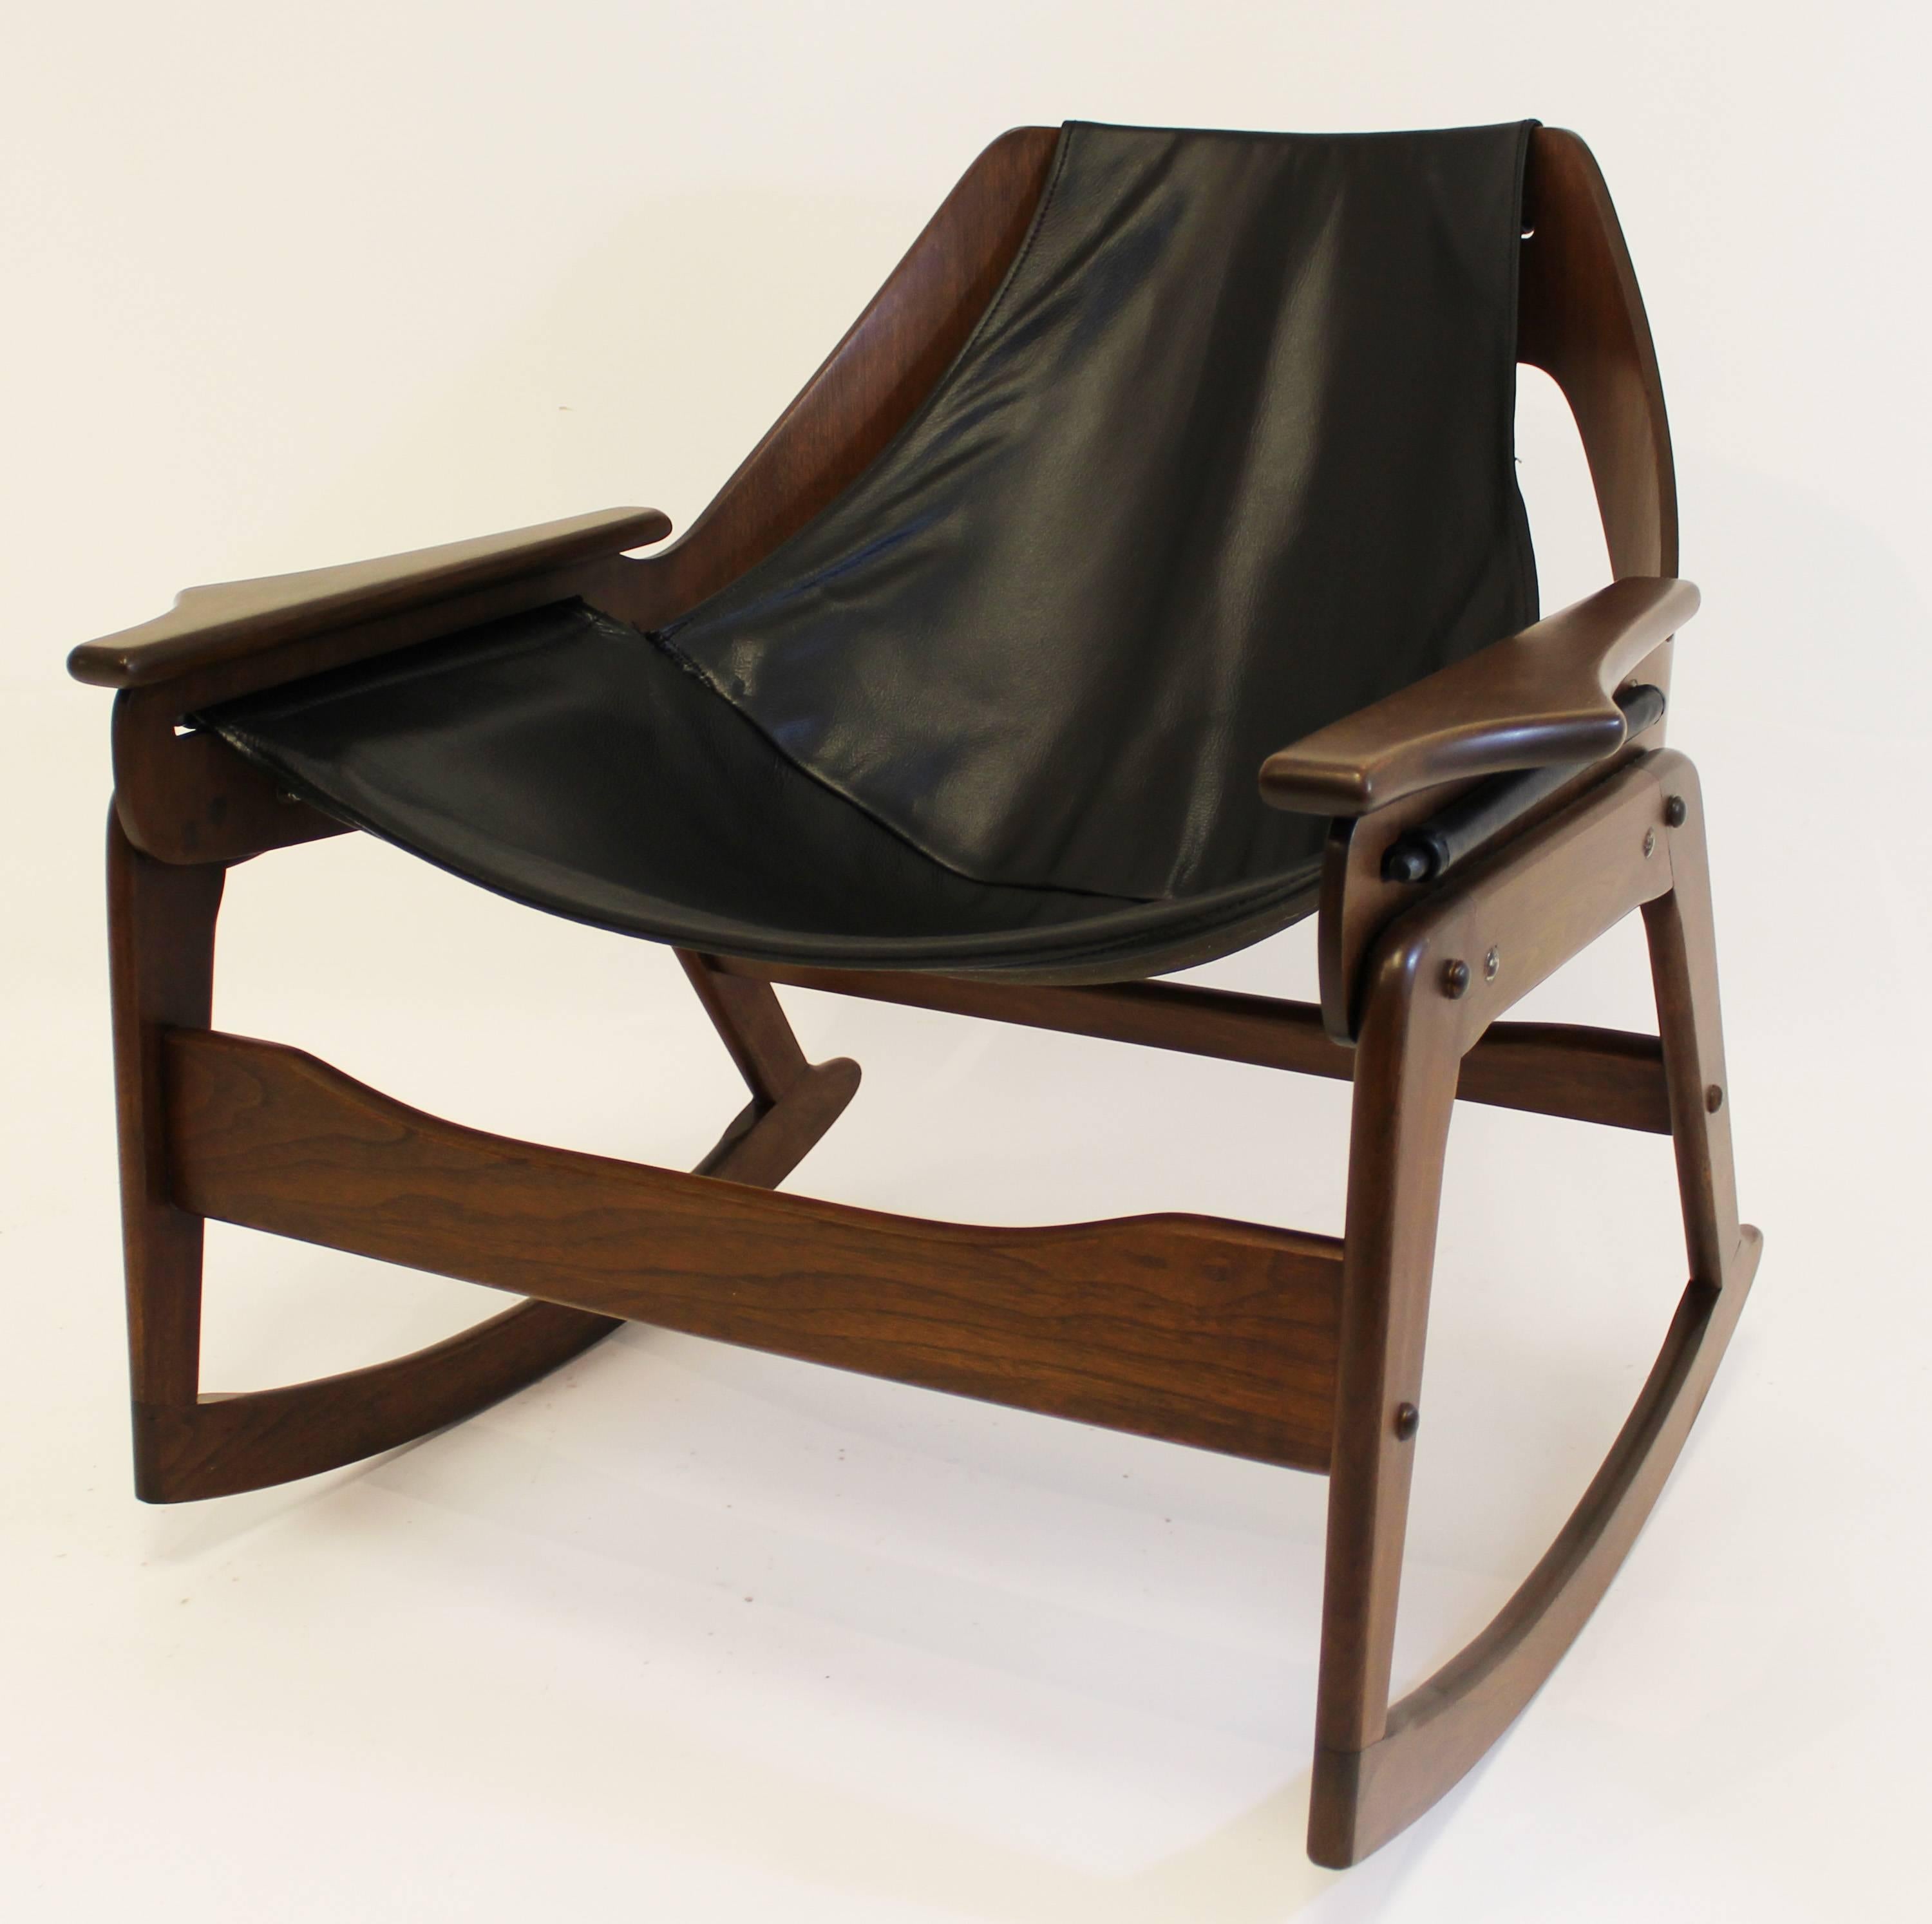 For your consideration is a stunning sling rocker by Leathercrafter made of dark walnut and leather, circa 1960s. In excellent condition. Professionally refinished. The dimensions are 30.25